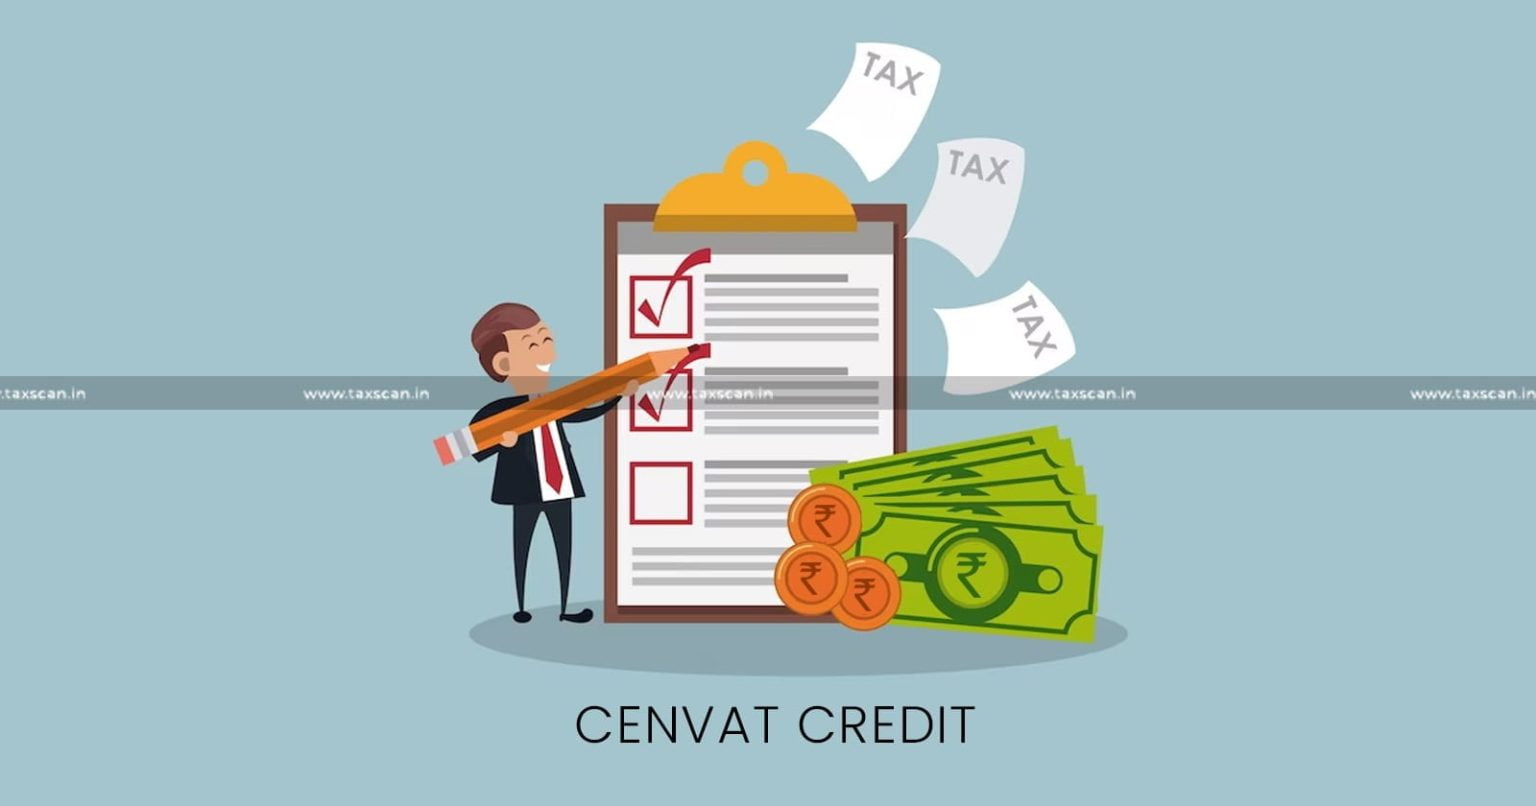 CESTAT - Rejection - Recovery of Availed CENVAT Credit - CENVAT Credit - Excise Duty - Corroborative Evidence - taxscan